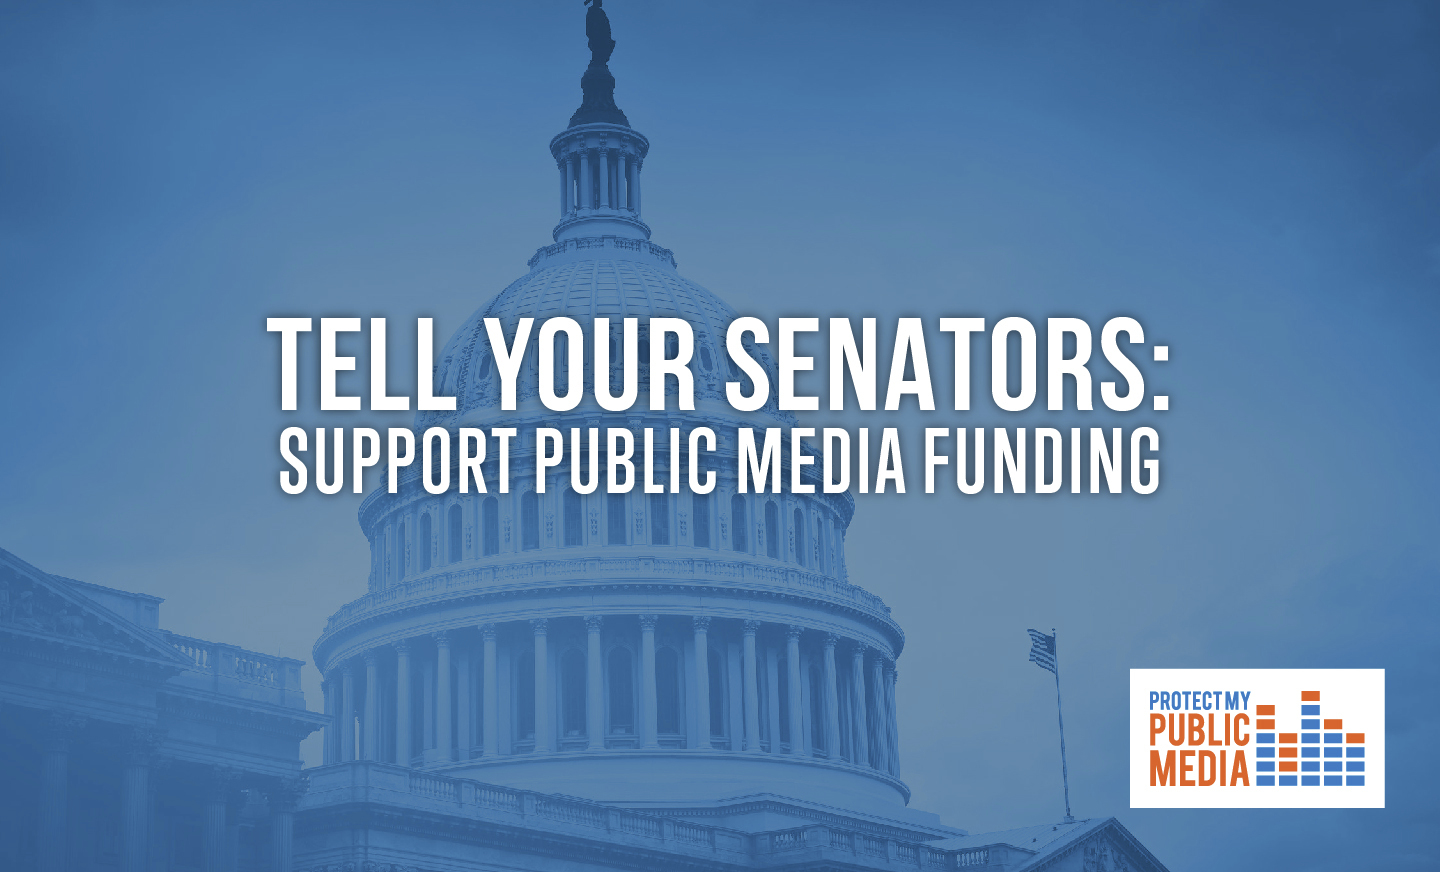 Featured image for “Senate to Consider Public Media Funding”